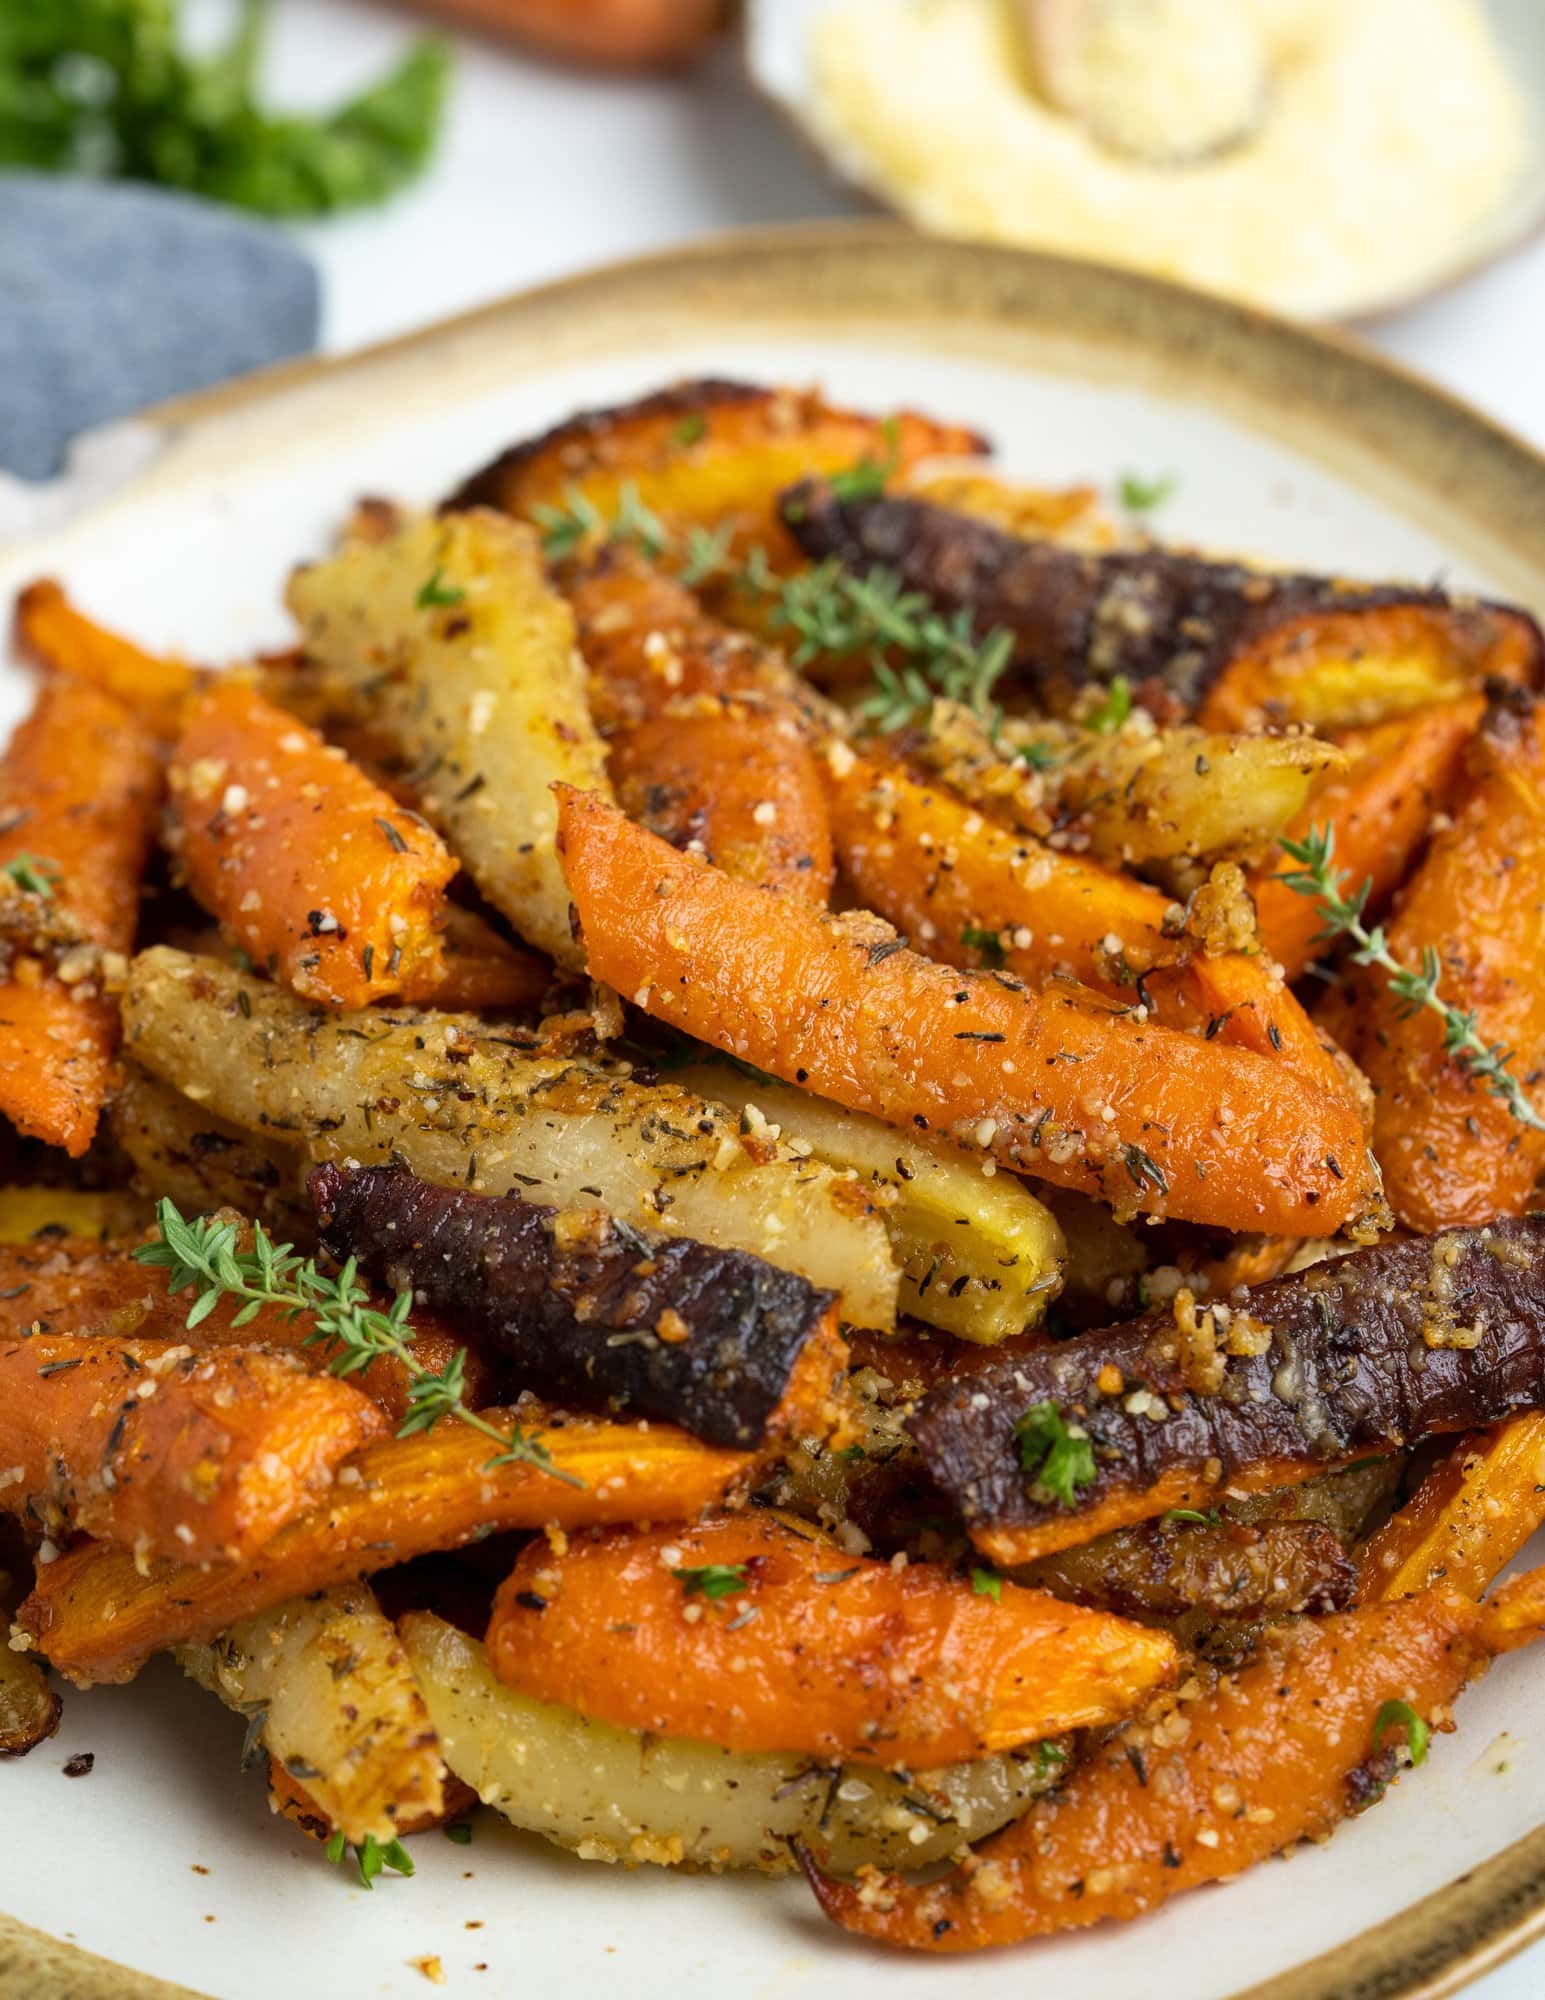 Carrots tossed in butter, olive oil, garlic, herbs, and parmesan cheese makes the best ever roasted Carrots. The natural sweetness of the caramelized carrots complements the savory seasoning, making it one of our favourite side dishes. 